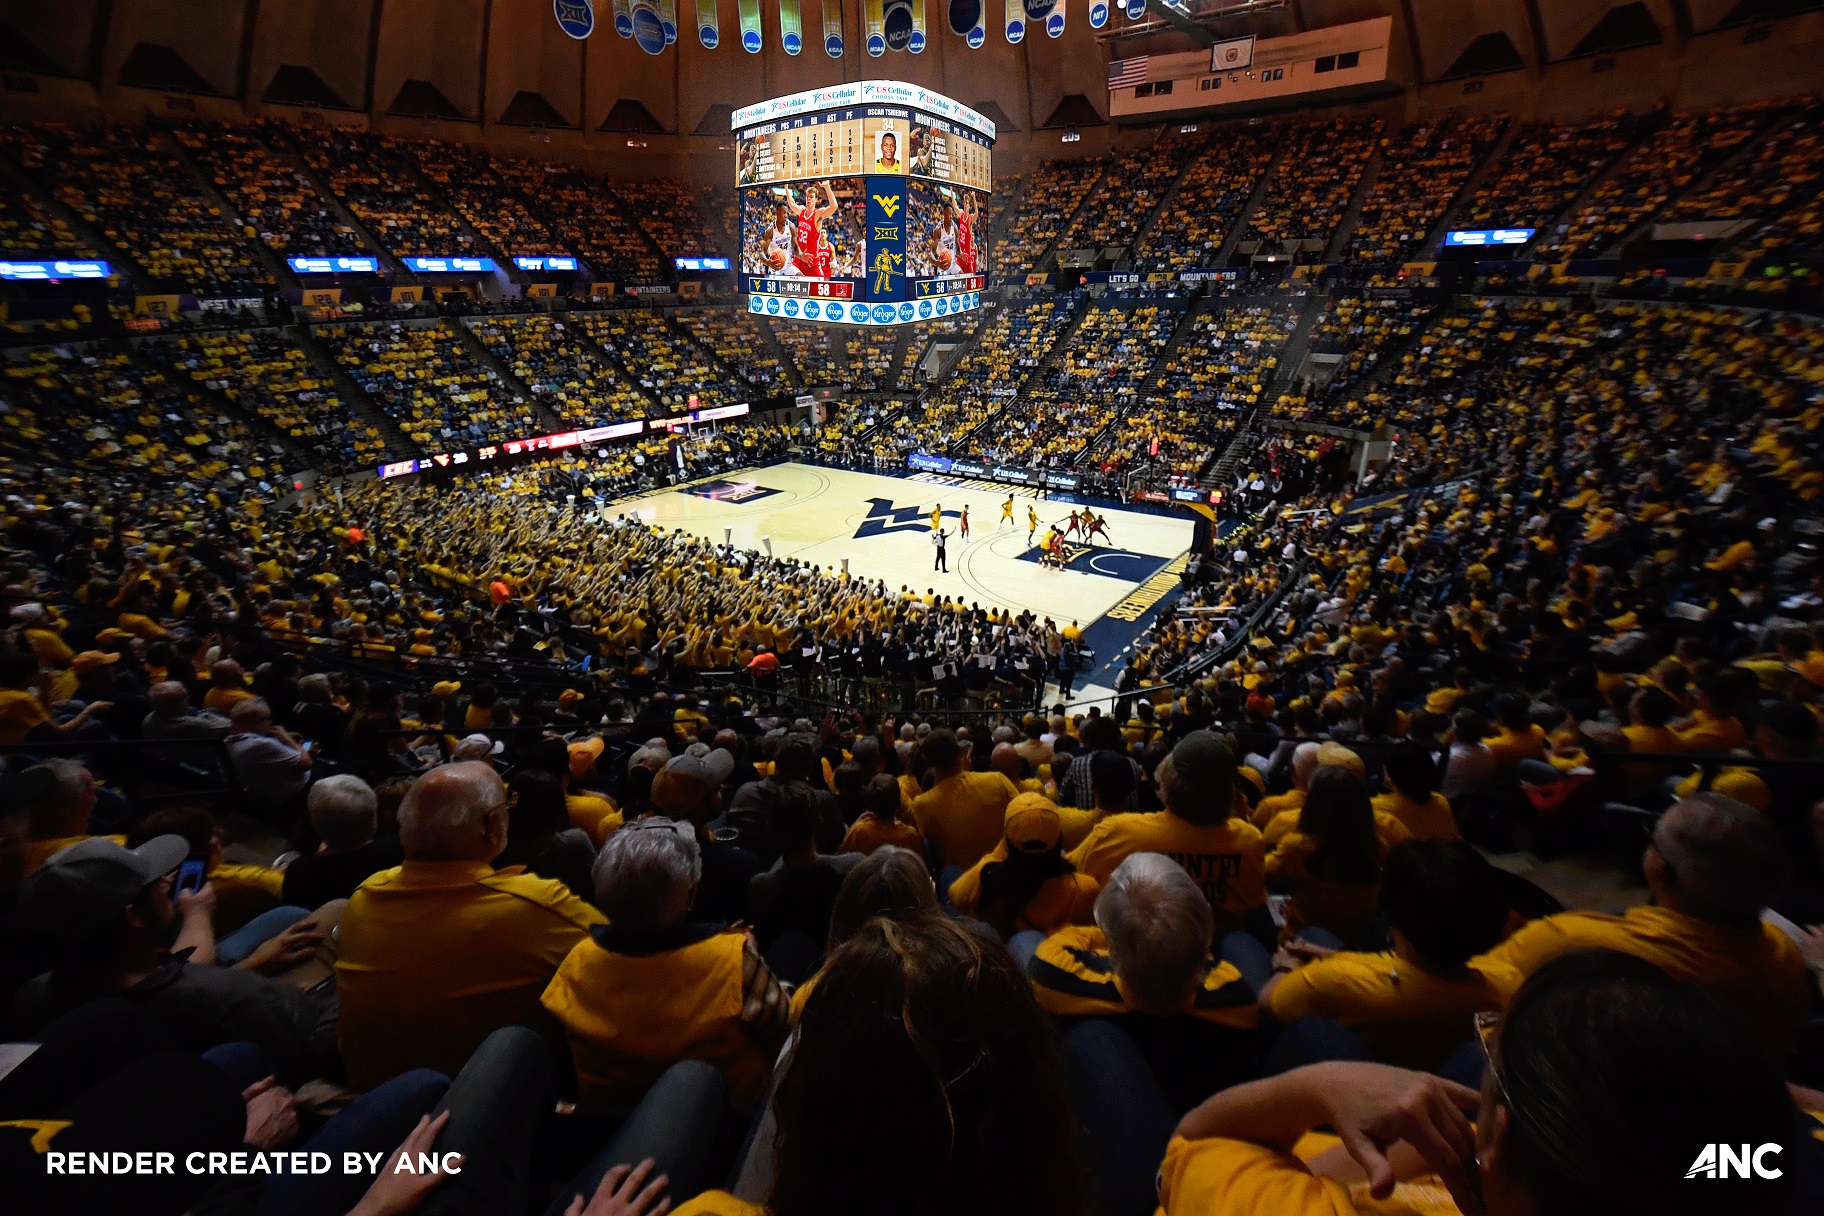 An ANC render depicting the multi-faceted center-hung scoreboard at The WVU Coliseum.